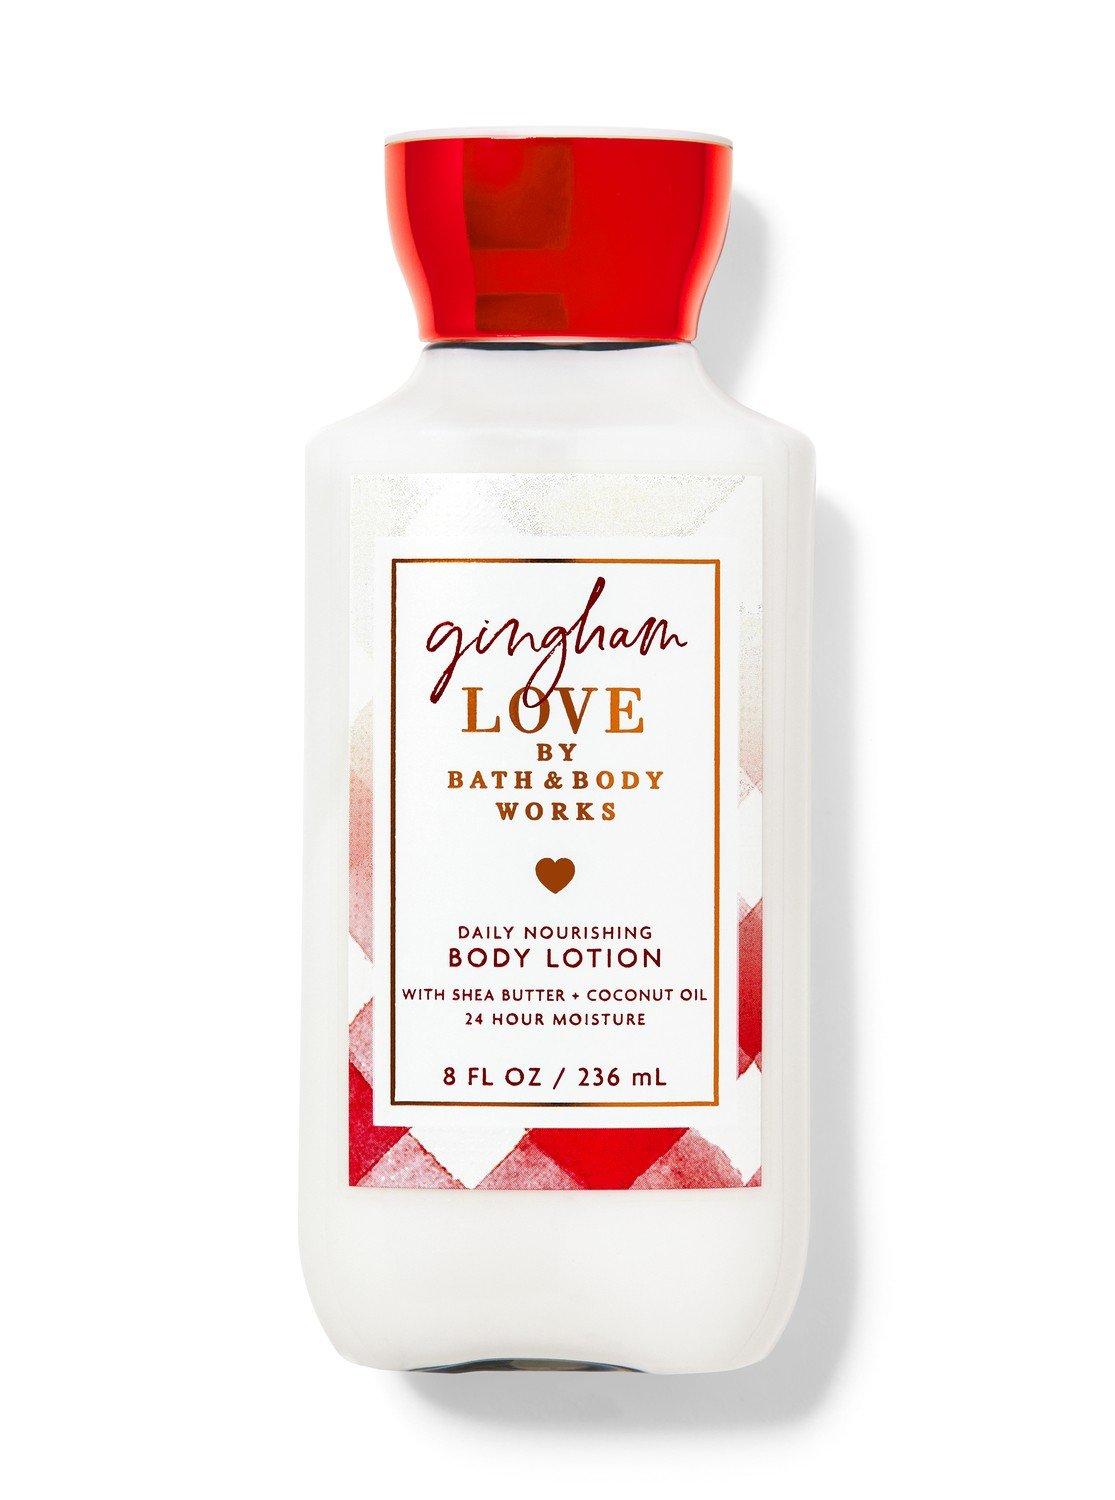 Buy Gingham Love Daily Nourishing Body Lotion Online Bath And Body Works Philippines 4914